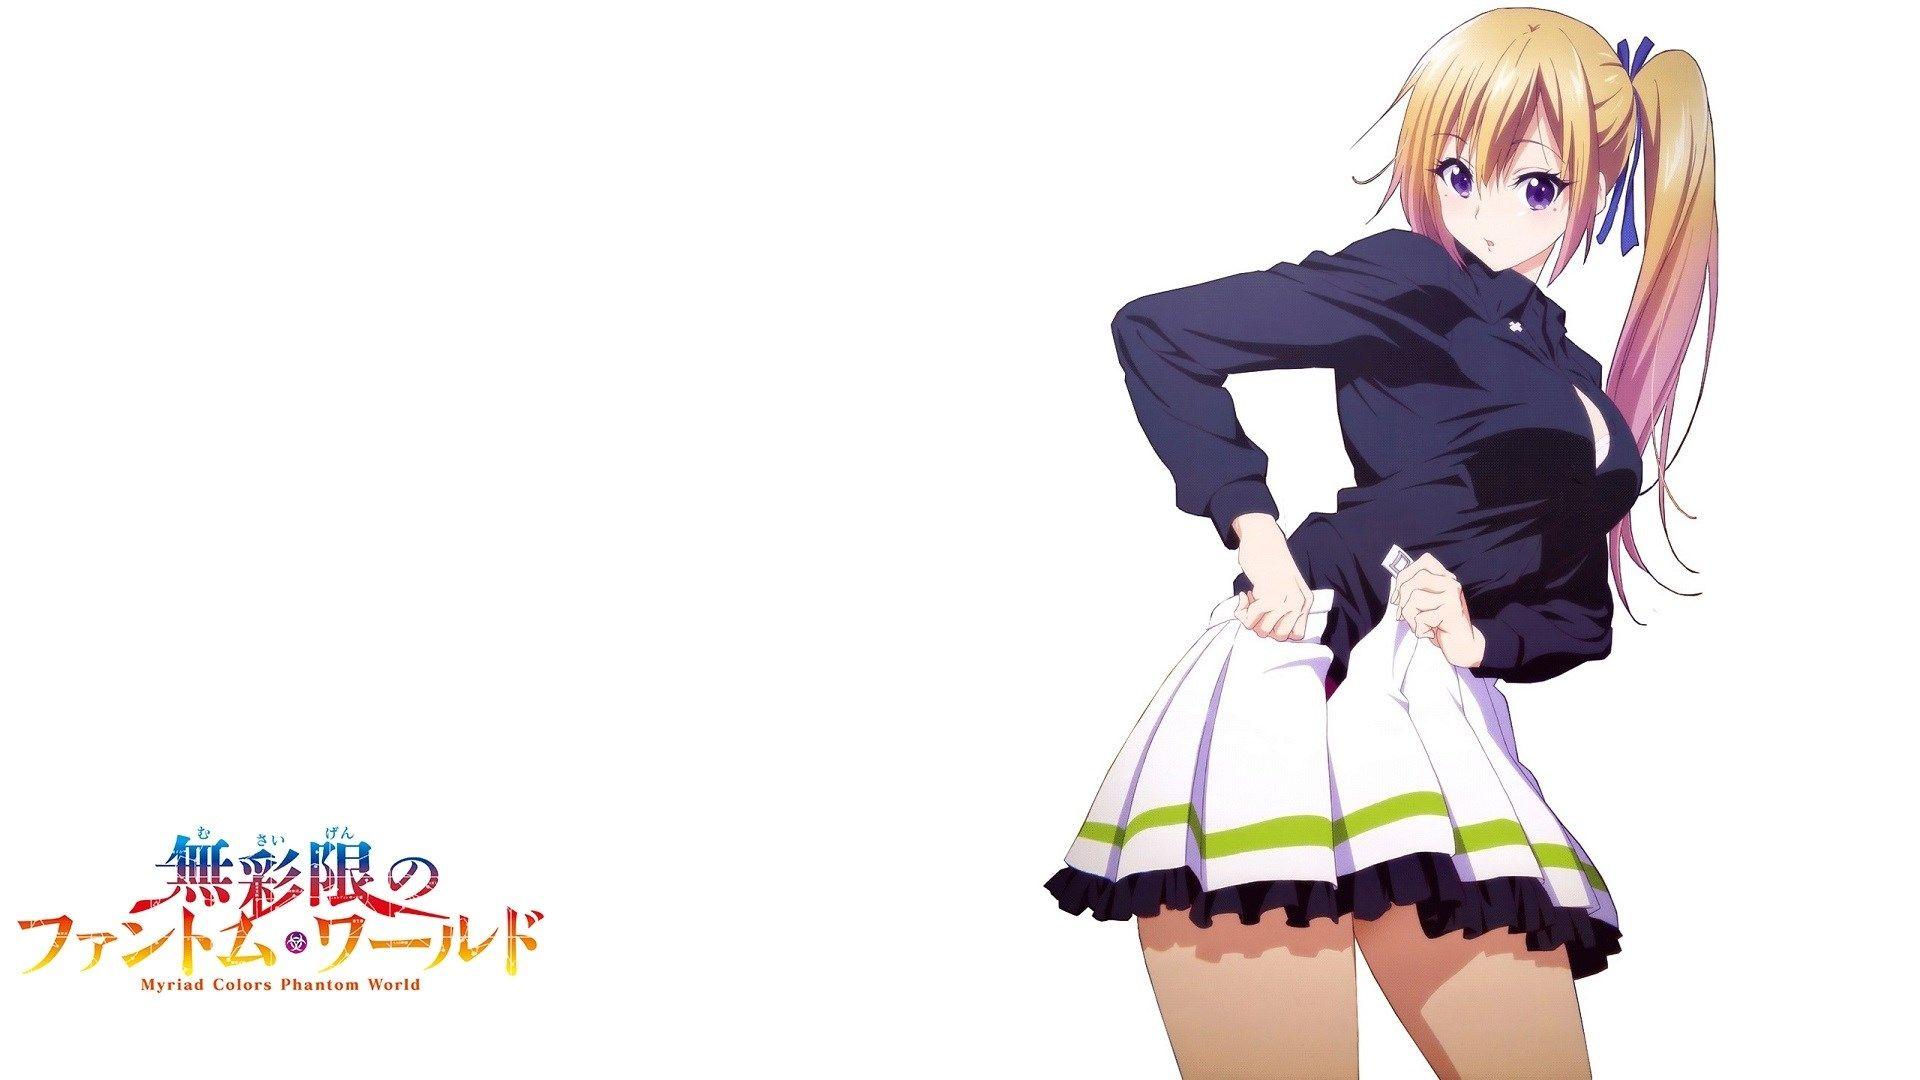 Background In High Quality colors phantom world